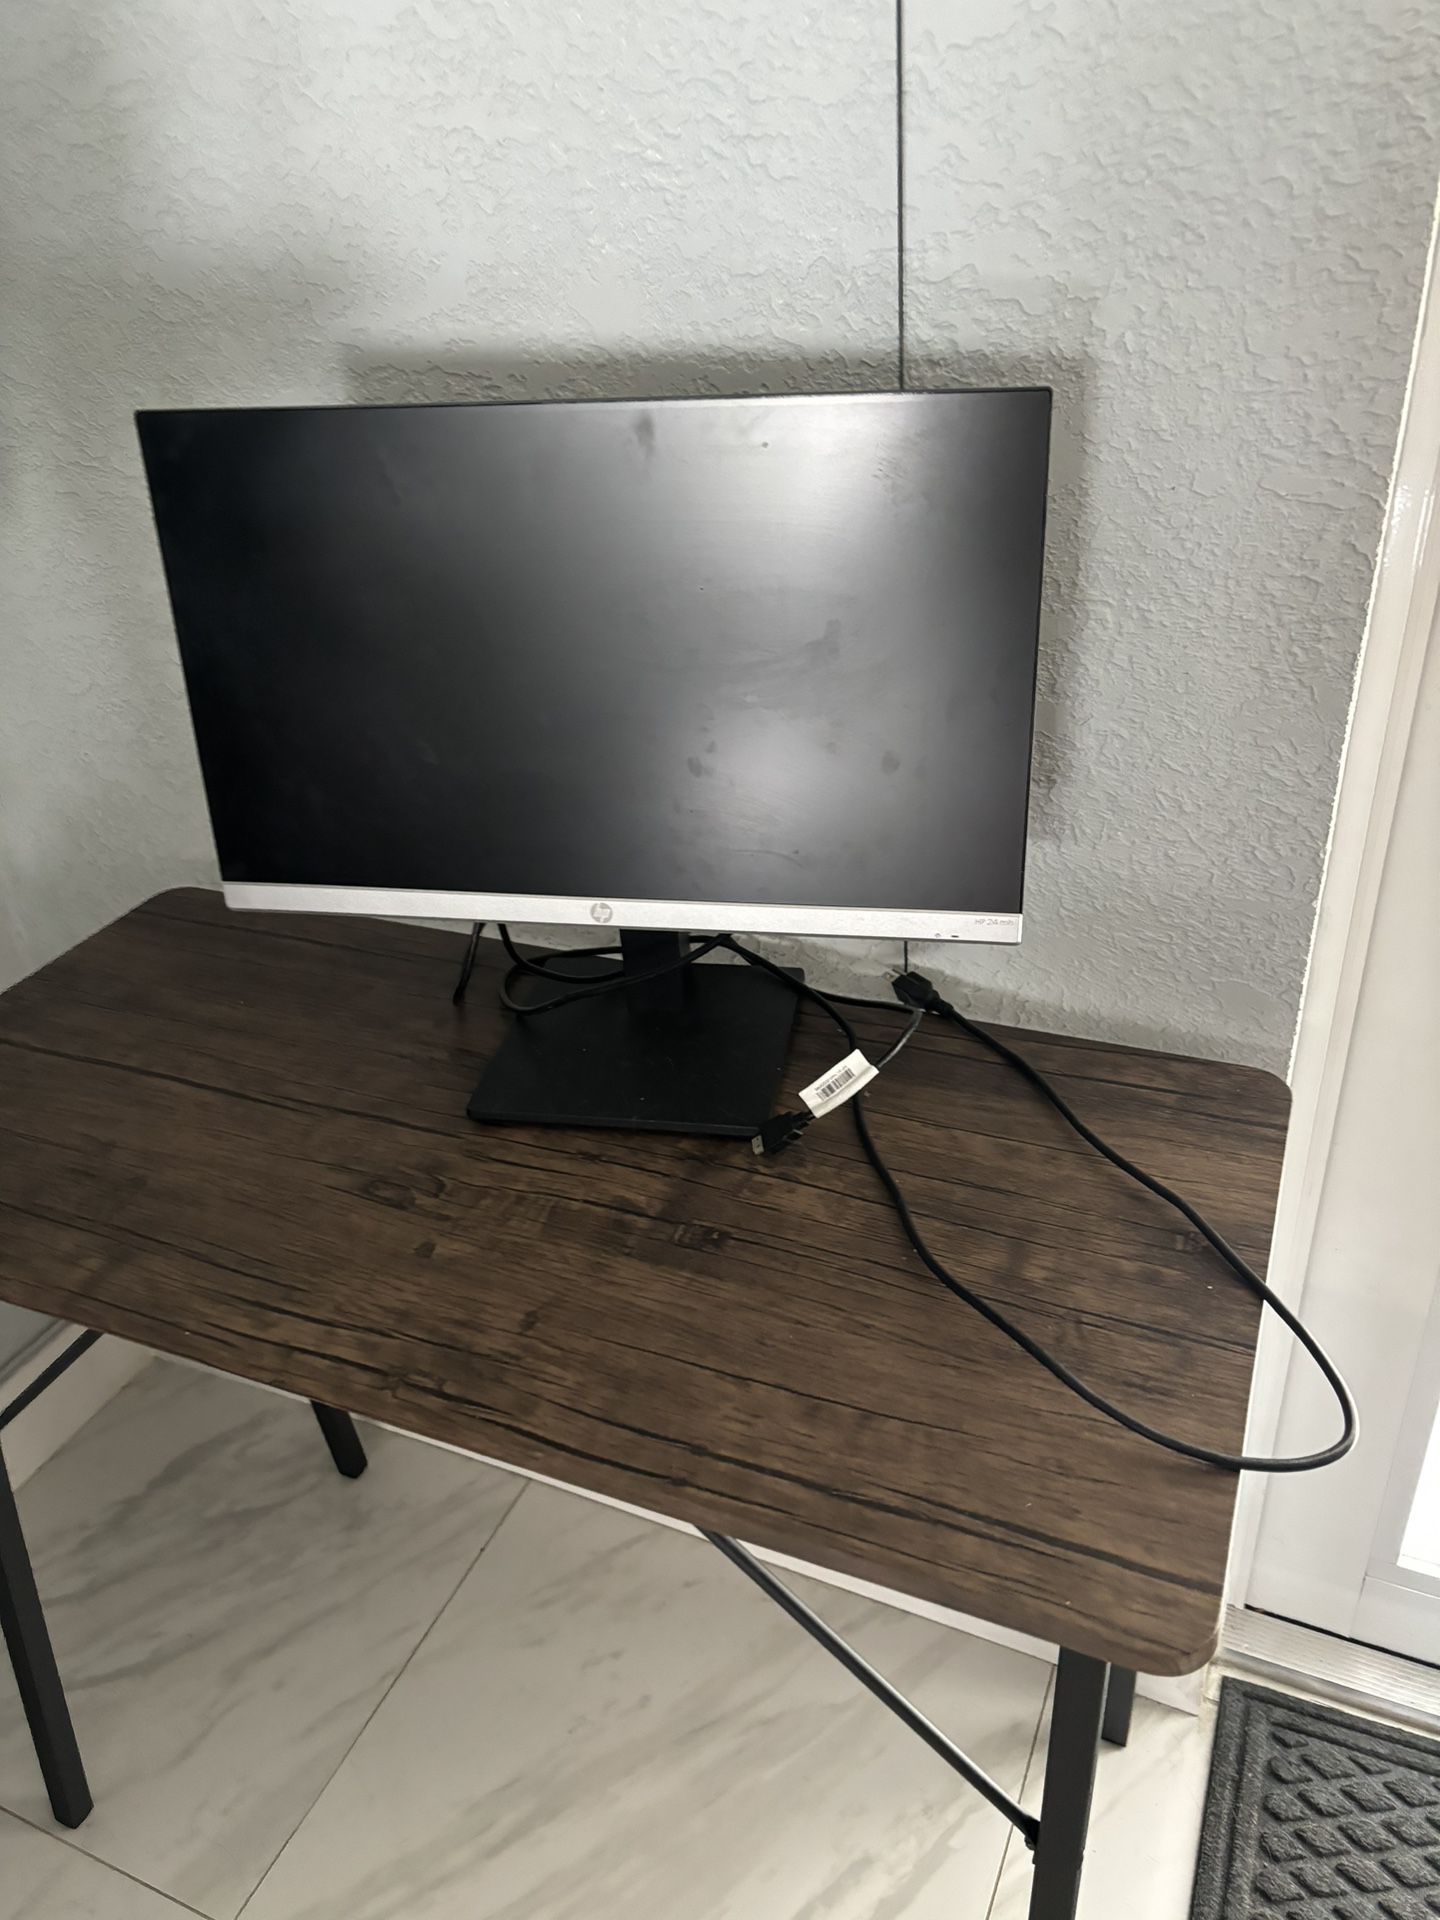 Computer Monitor HP 24” Desk Is For Sell Too($20)